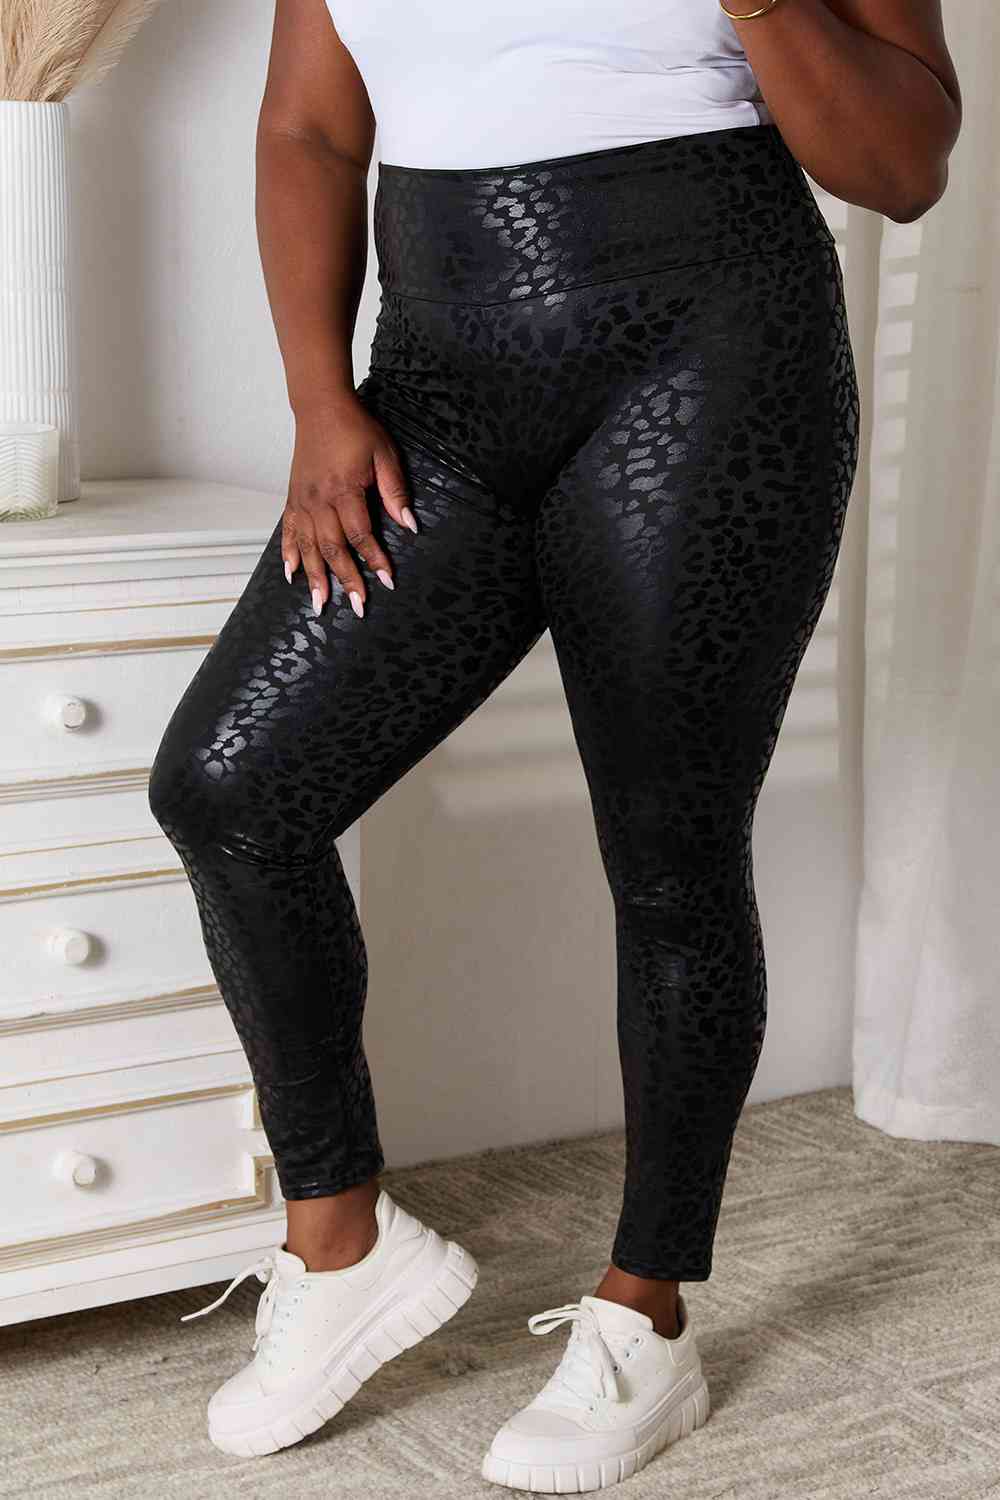 Double Take High Waist Leggings, perfect for workouts or everyday wear- black 